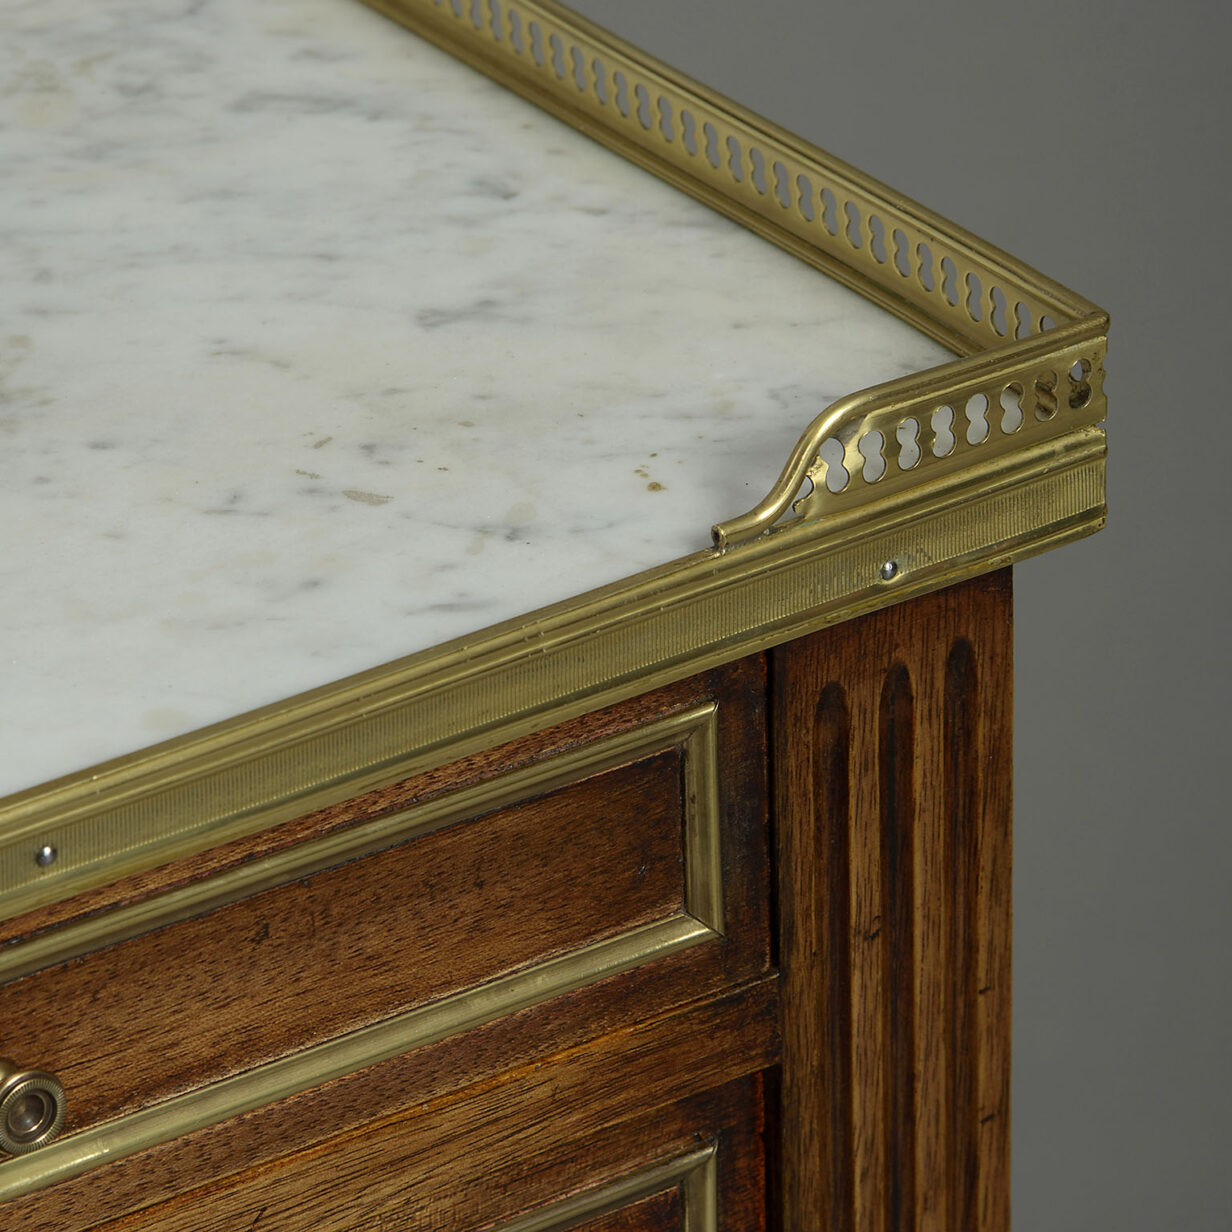 Pair of Brass Mounted Mahogany Bedside Cabinets in the Louis XVI Manner